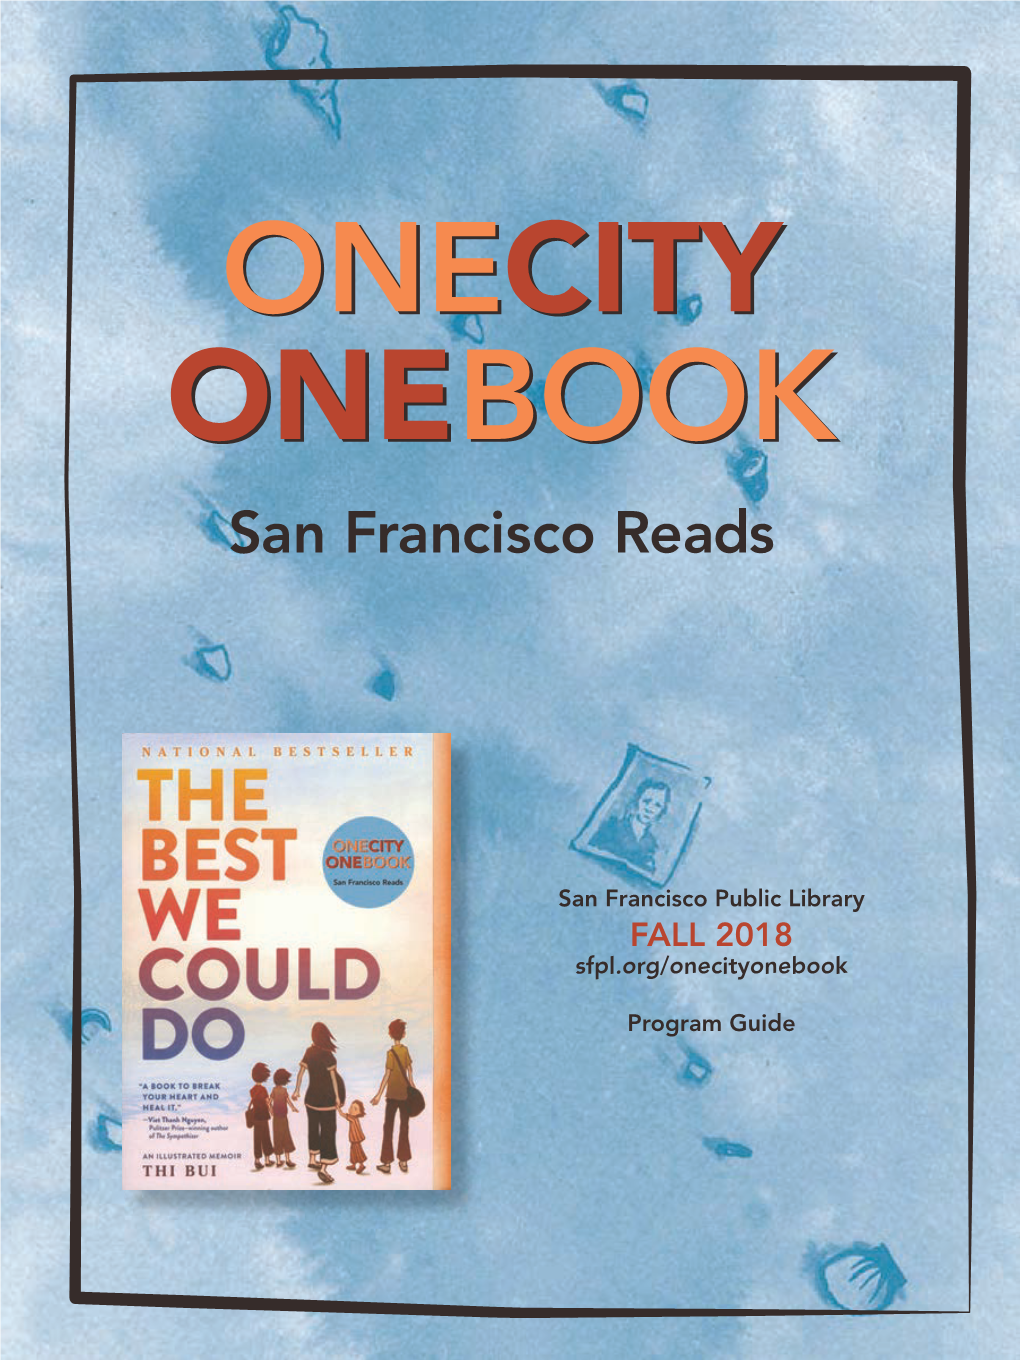 One City One Book 2018: the Best We Could Do